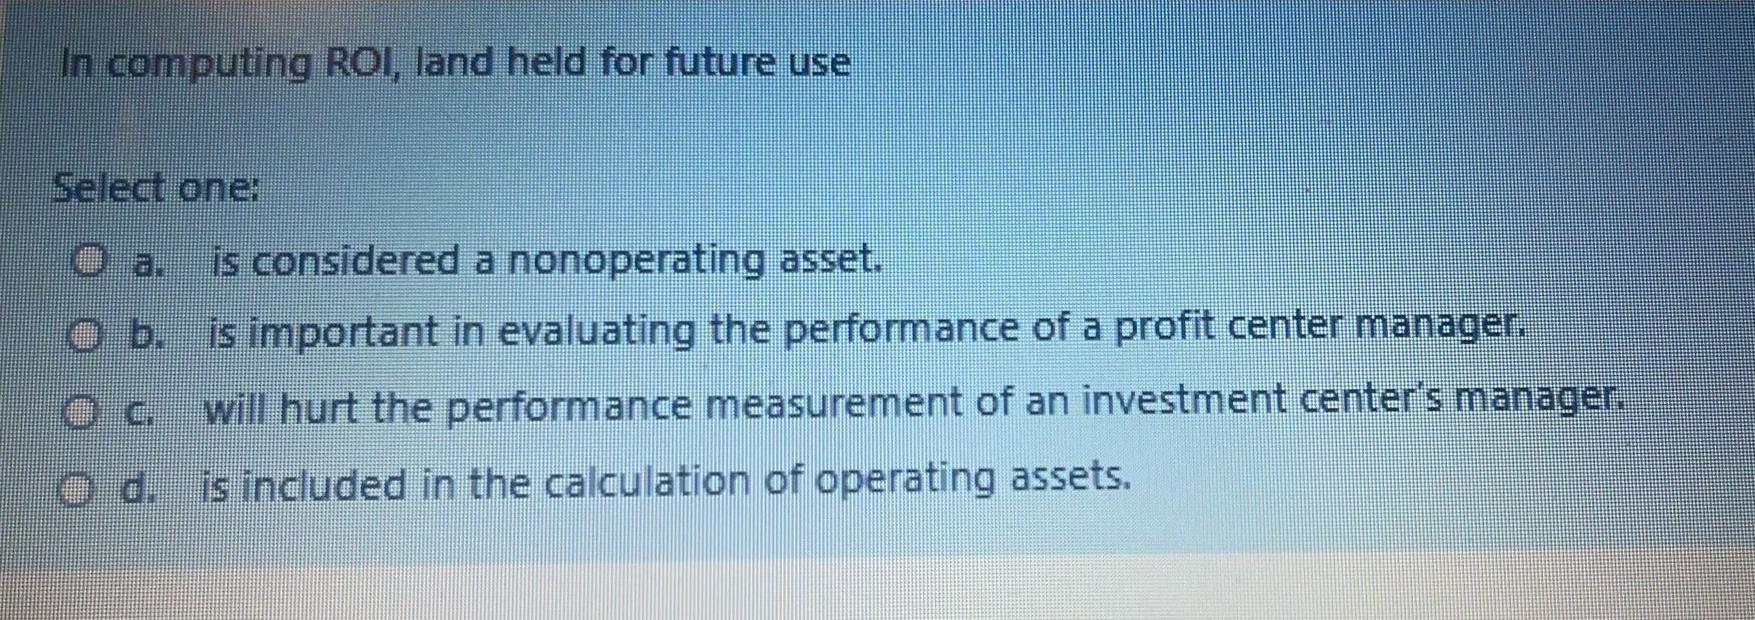 In computing ROI, land held for future useSelectone:O a. is considered a nonoperating asset.O b. is important in evaluati